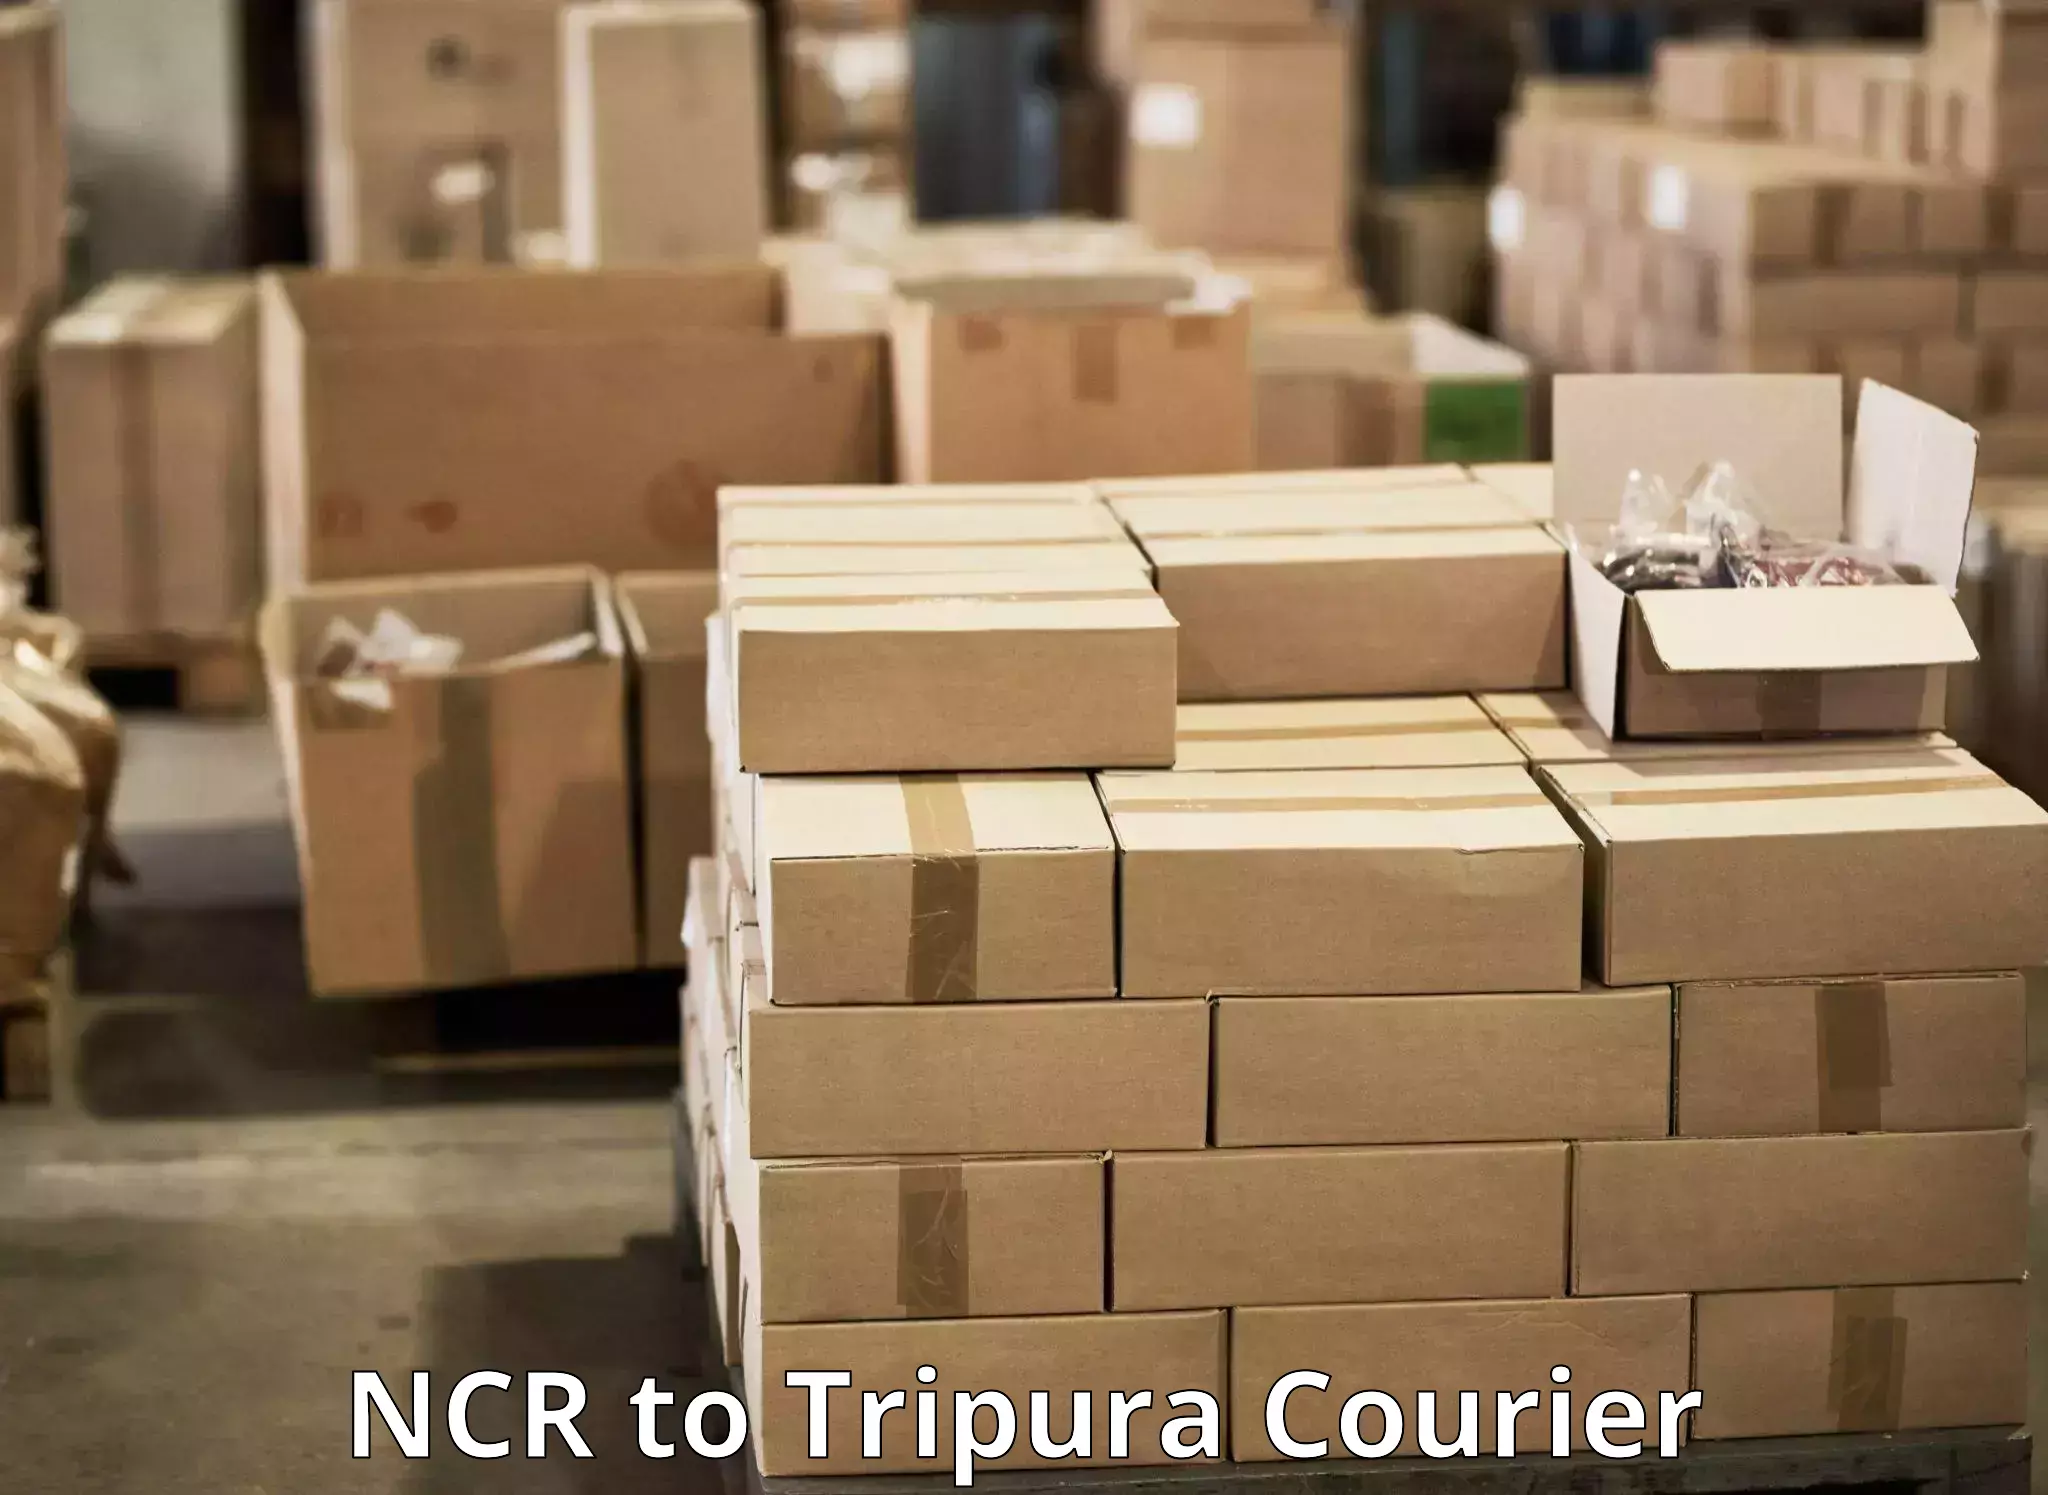 Seamless shipping service NCR to Udaipur Tripura